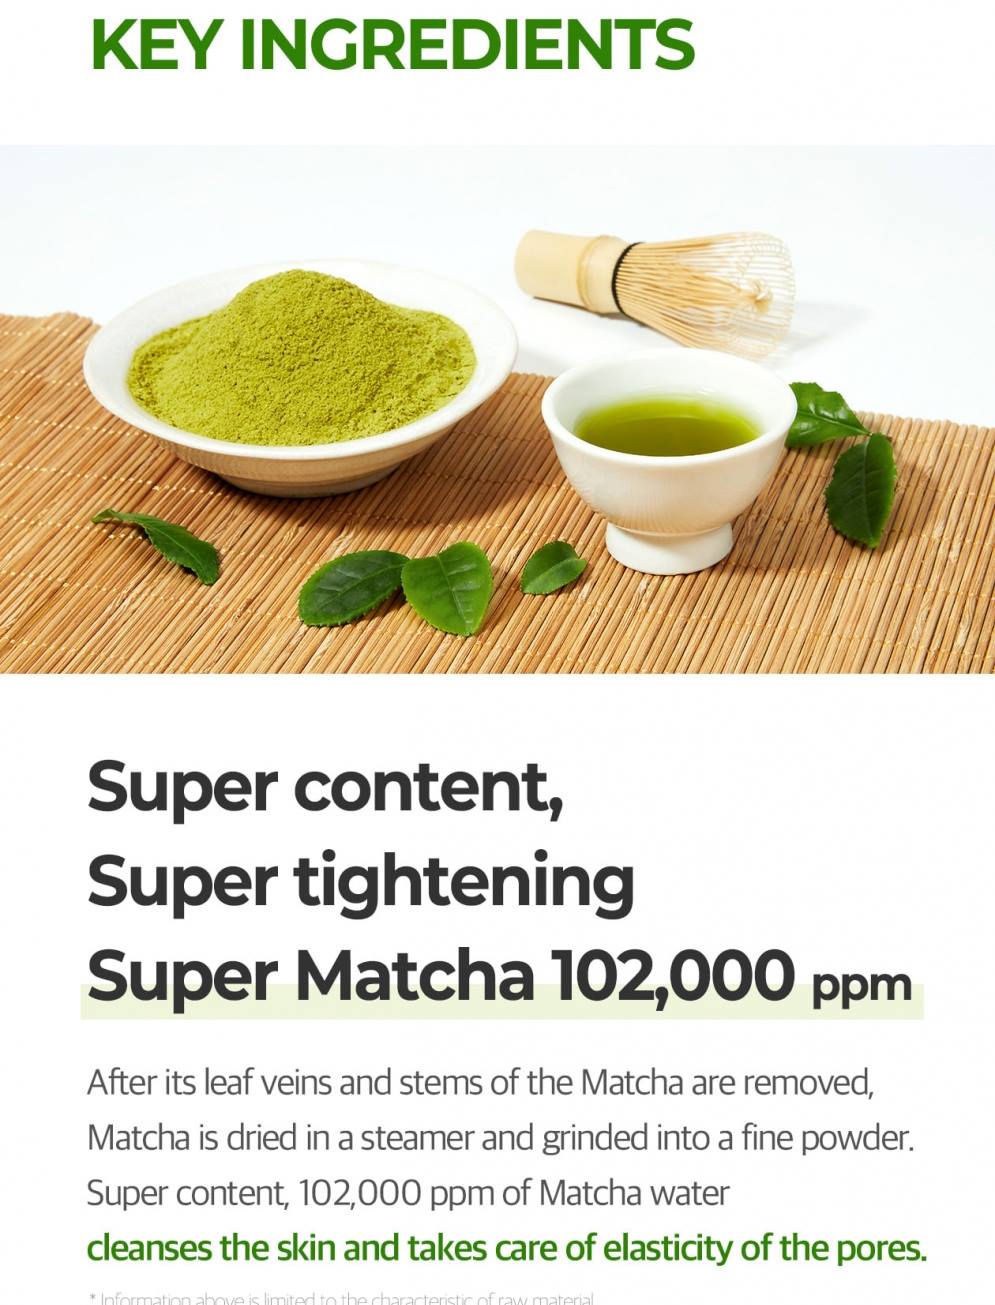 SOME BY MI Super Matcha Pore Clean Clay Mask 100g Pore Care tightening